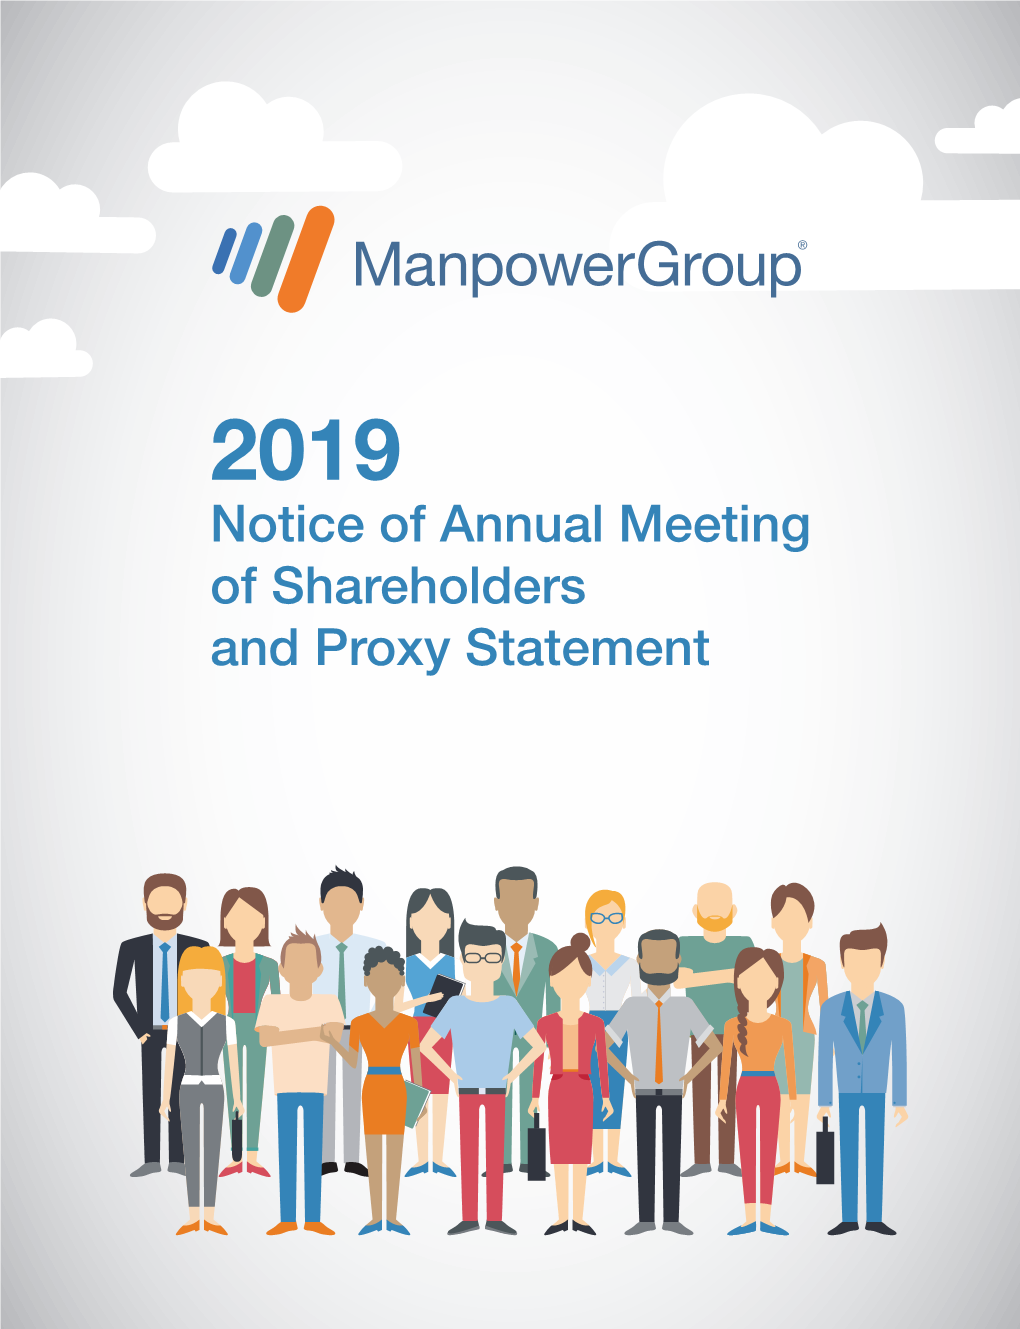 Notice of Annual Meeting of Shareholders and Proxy Statement